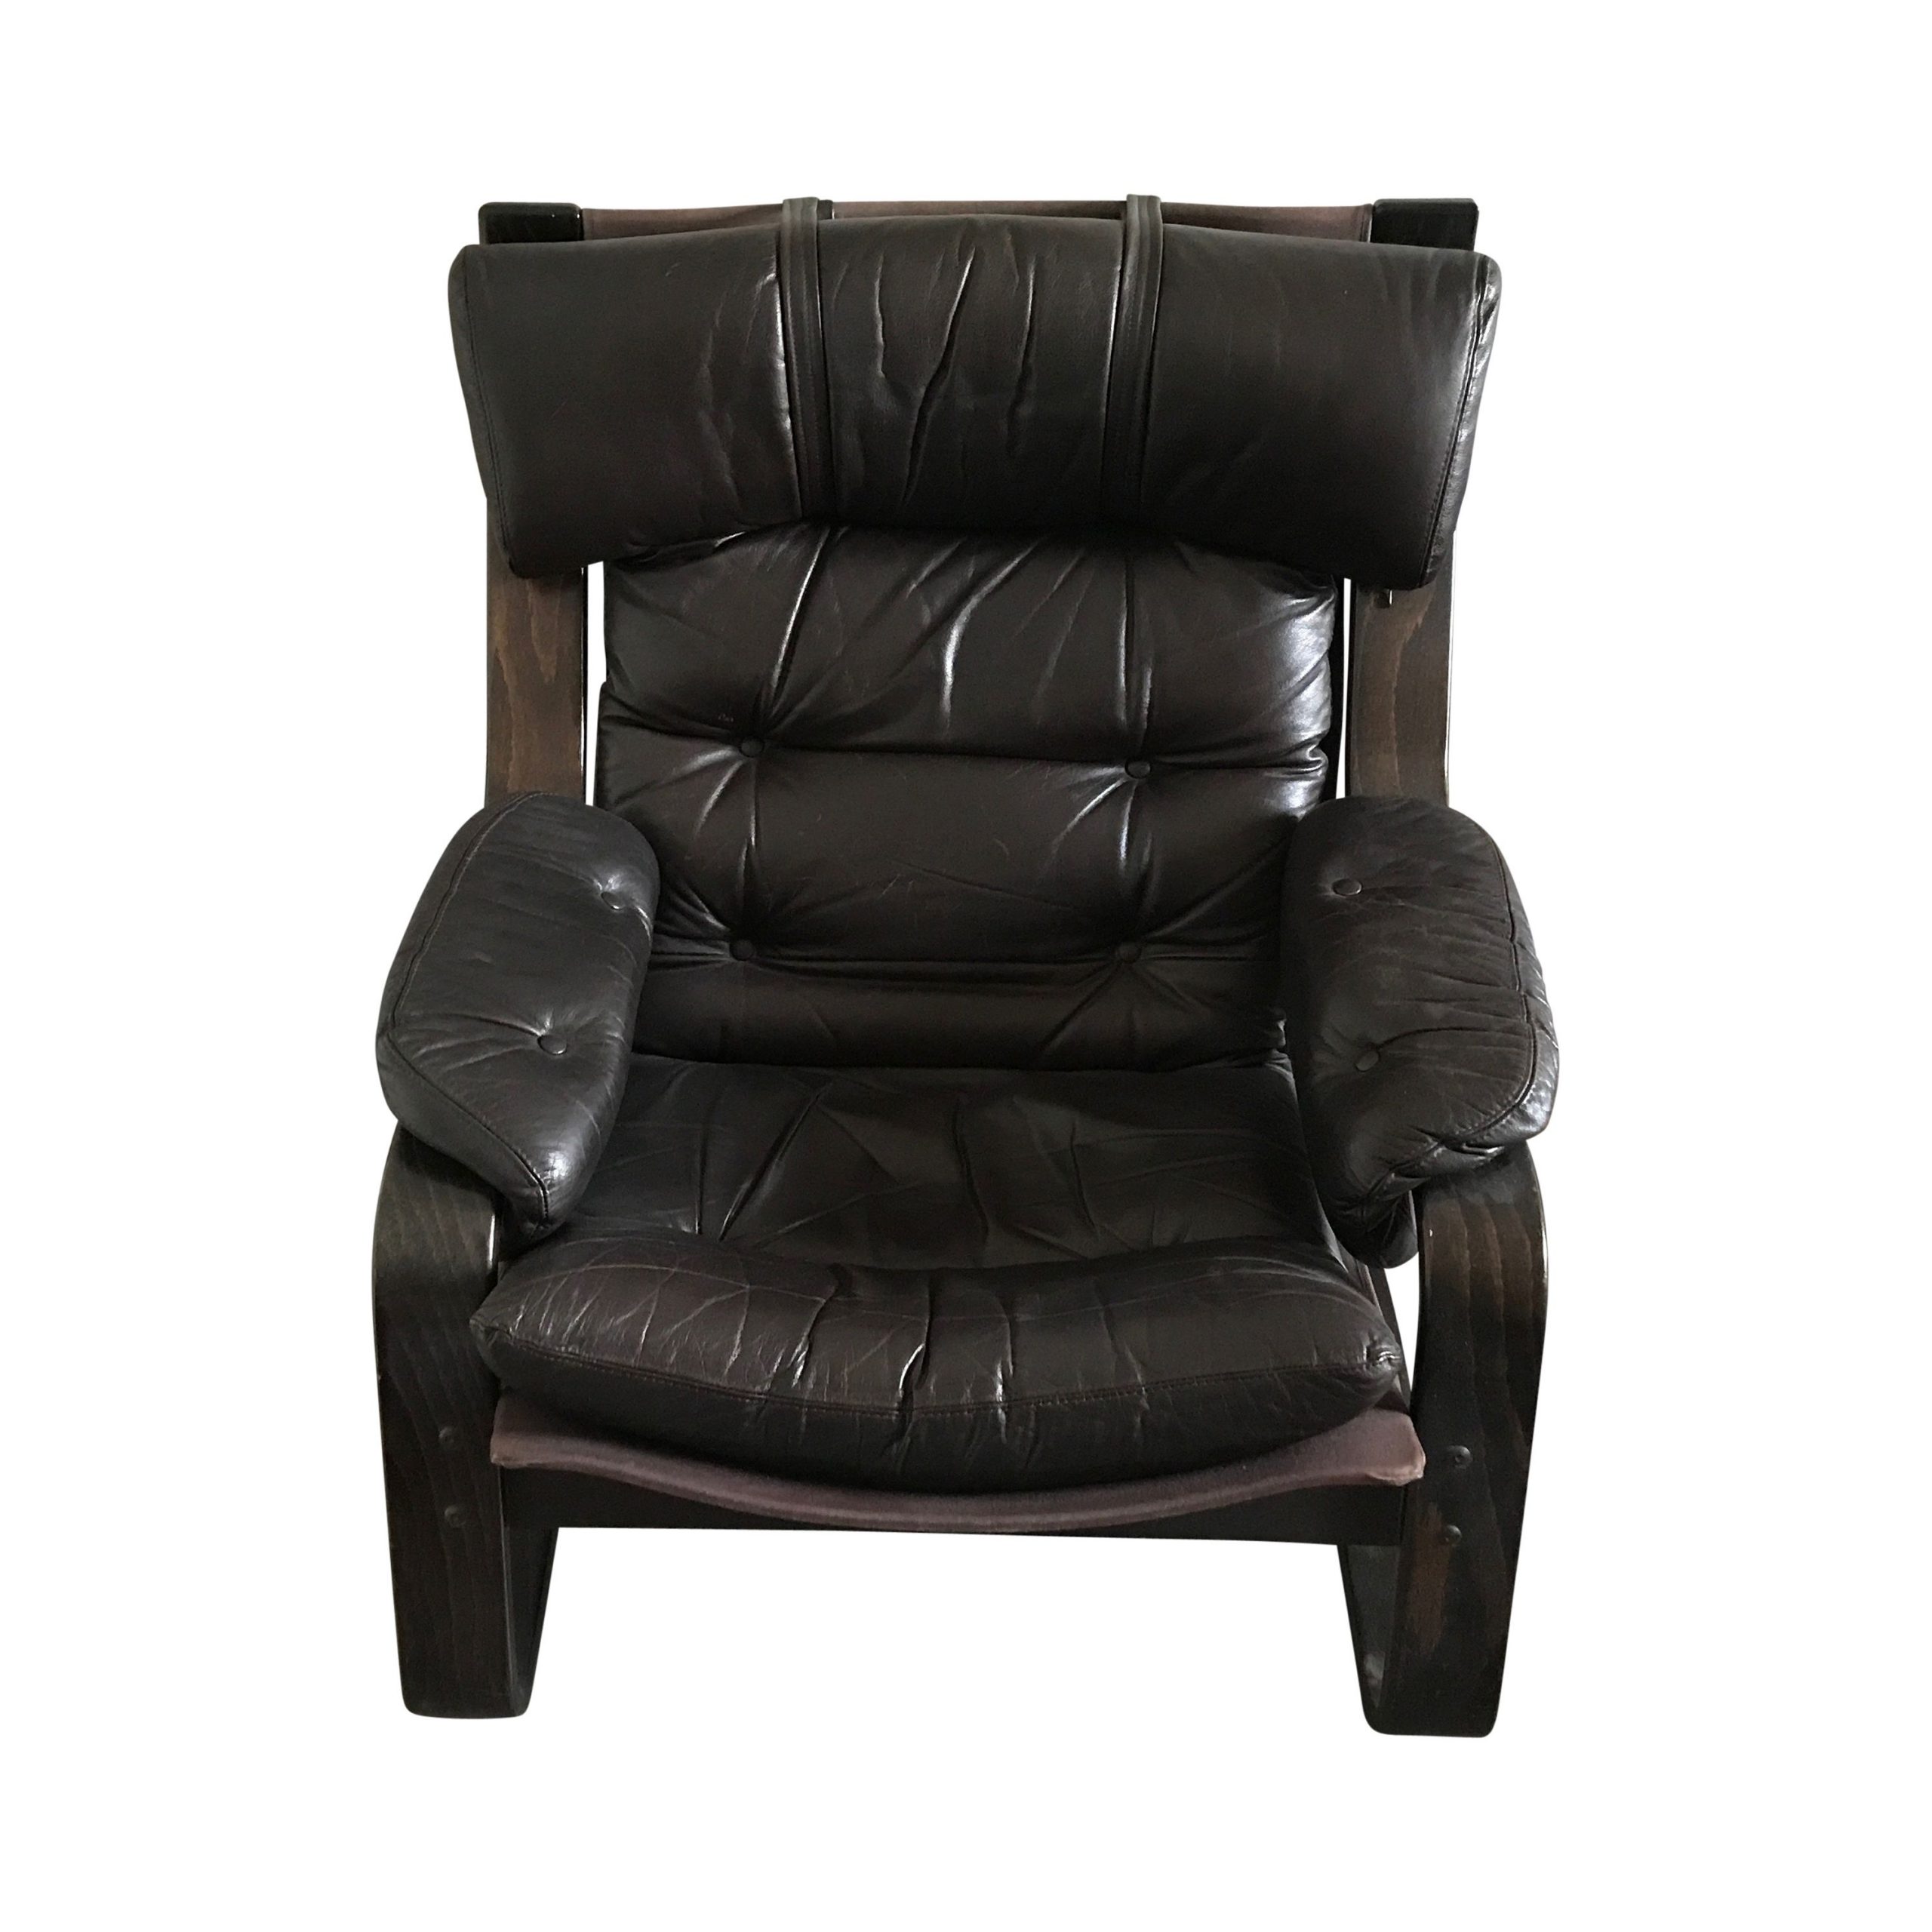 vintage-leather-and-wood-recliner-armchair-by-gote-mobel-sweden-1970s7-scaled-1.jpeg